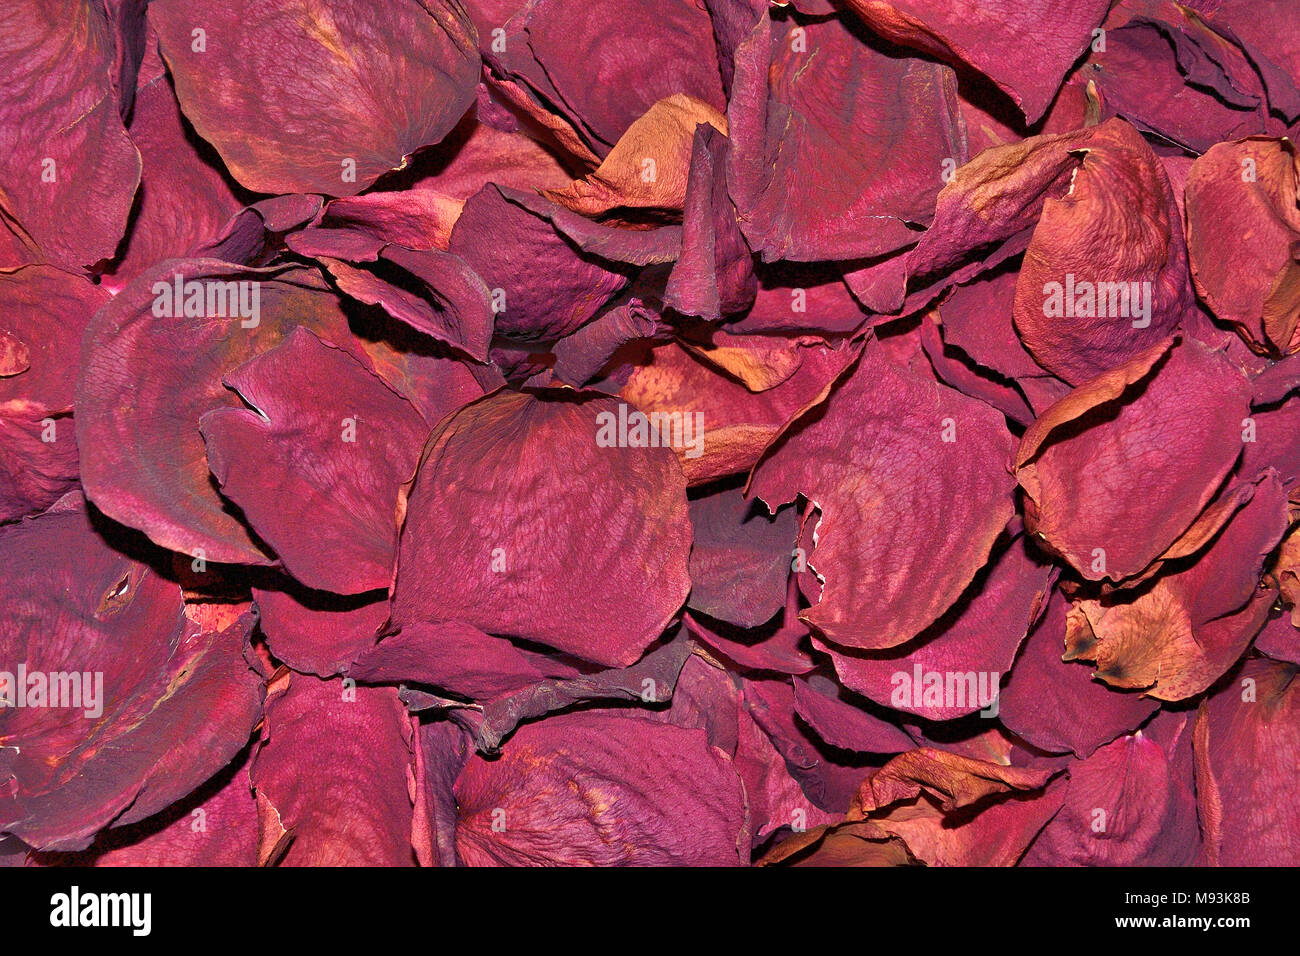 Dark red dried rose fragrant petals close up - raw materials for perfumery, cosmetology, spa for bath, tea, scin care, oil infusion or concept of plea Stock Photo